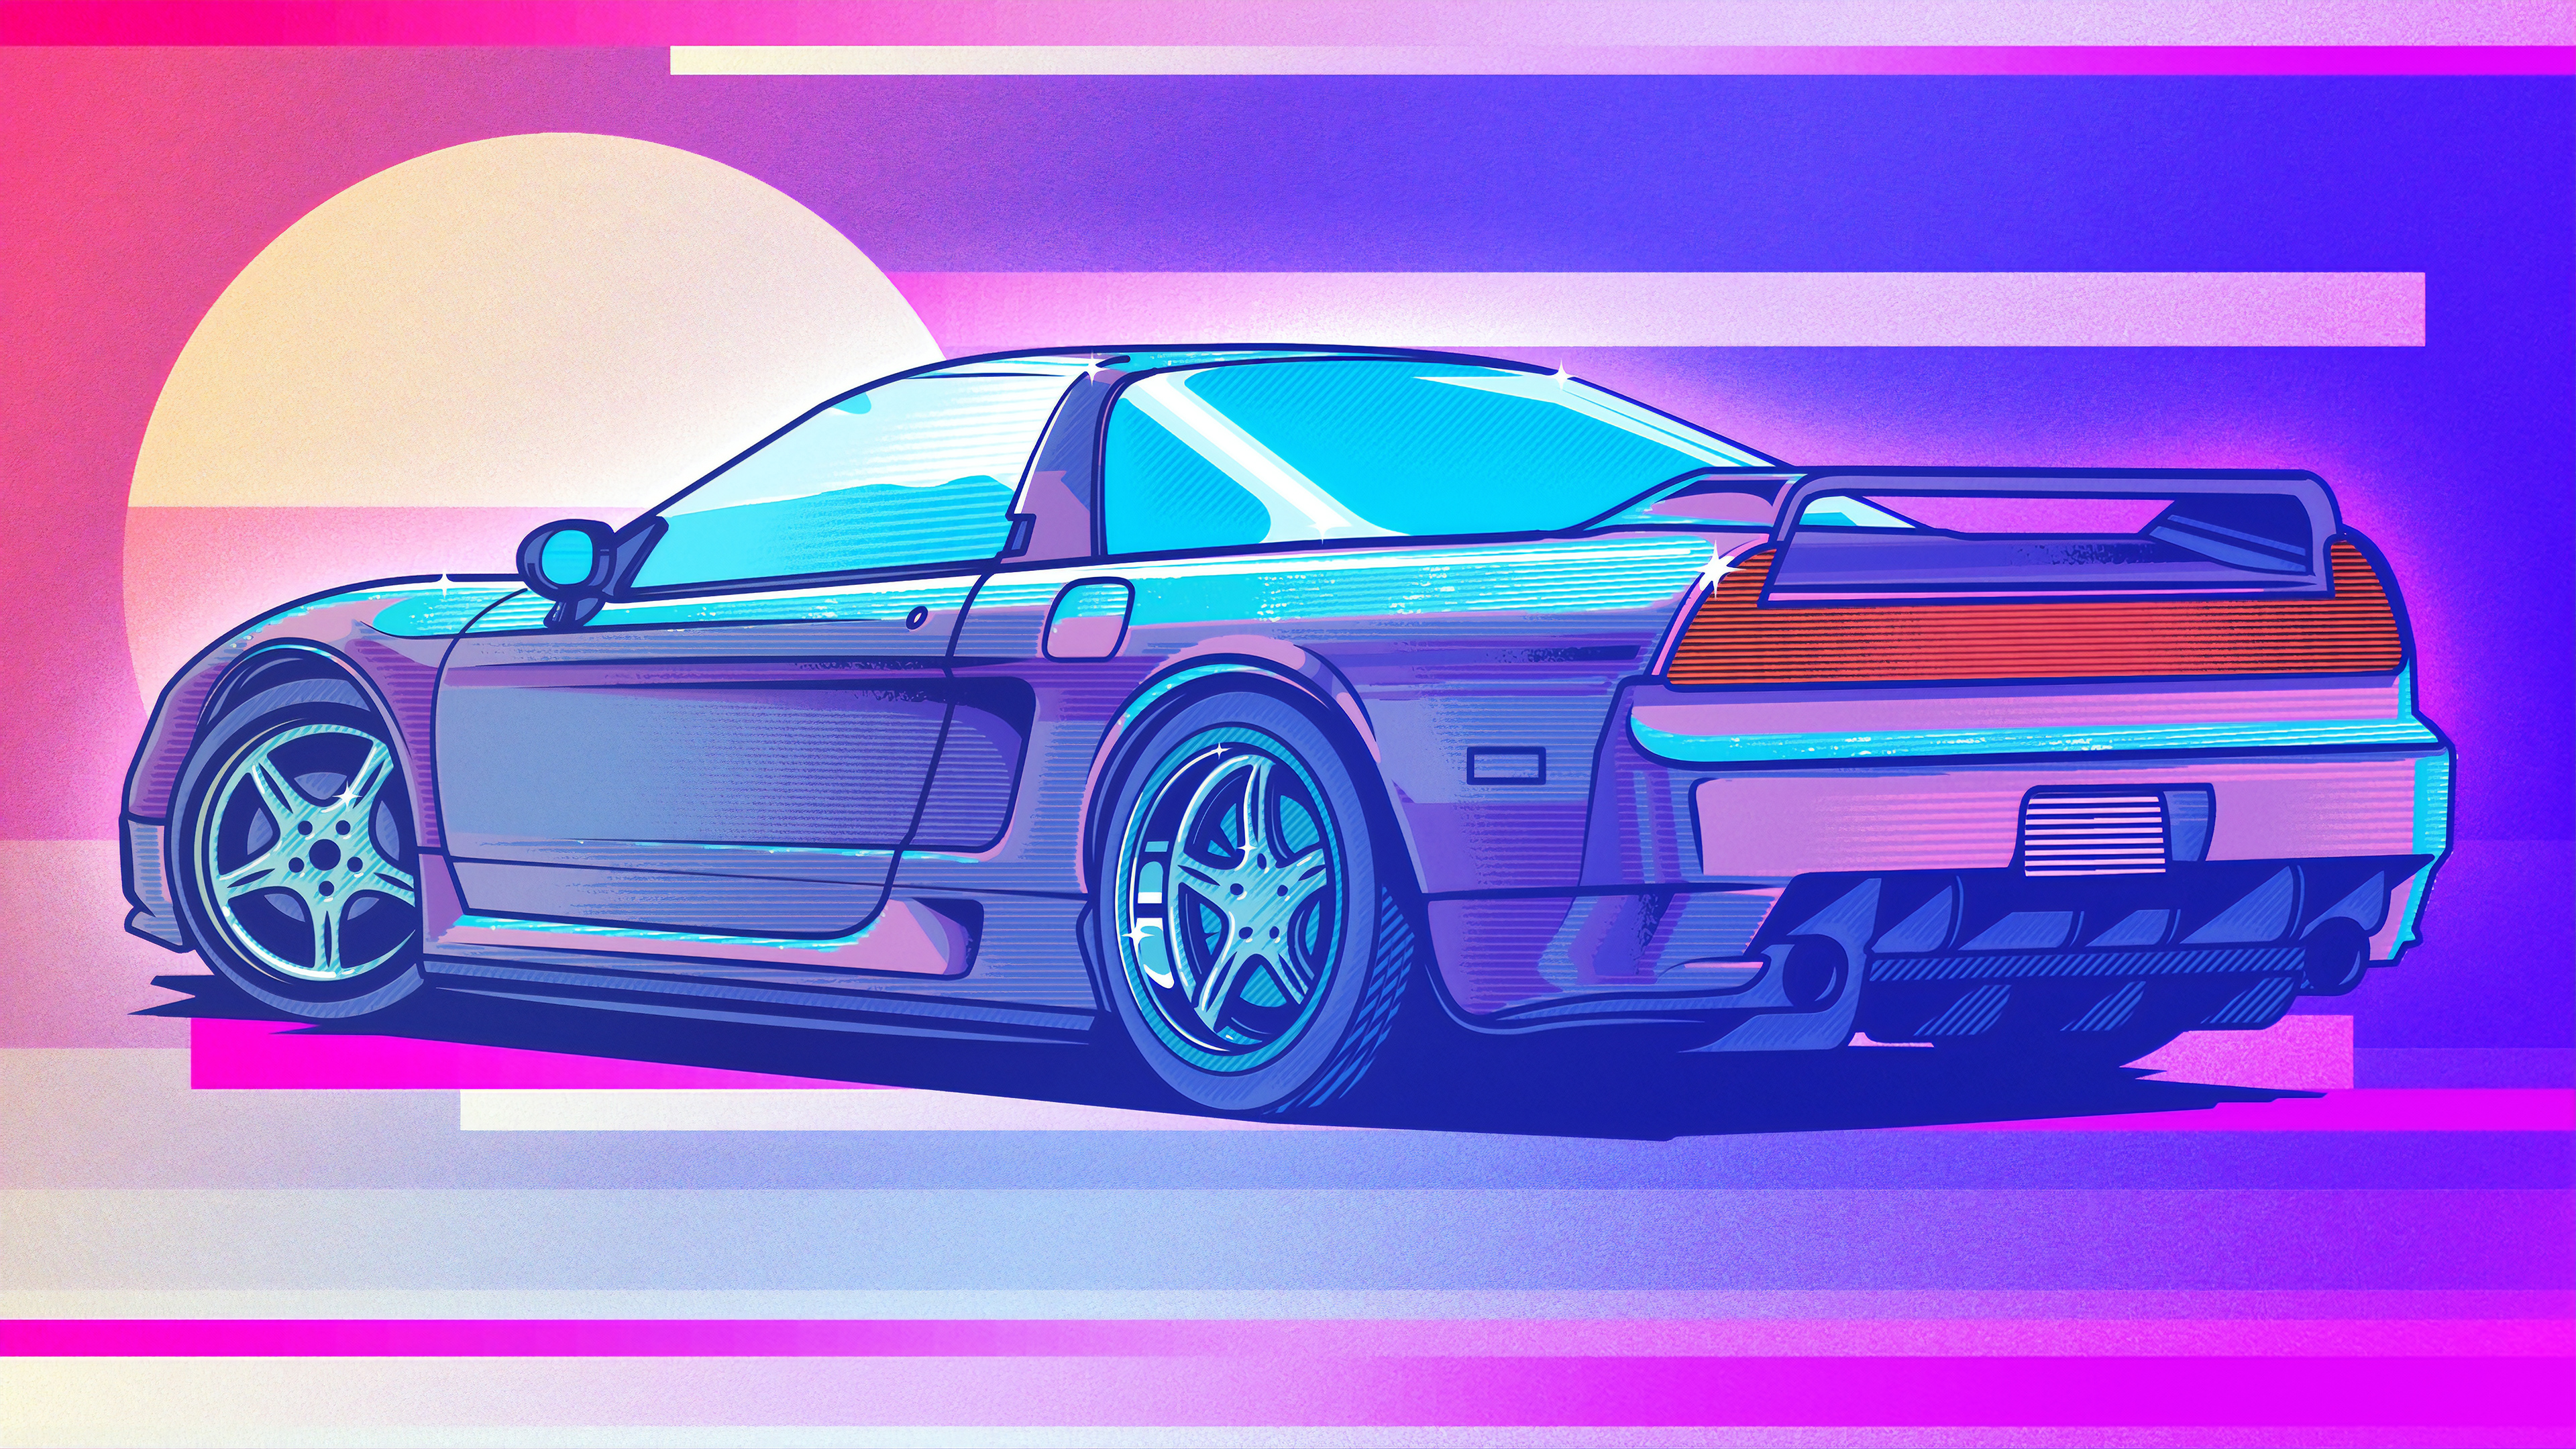 Honda nsx retrowave art k hd cars k wallpapers images backgrounds photos and pictures